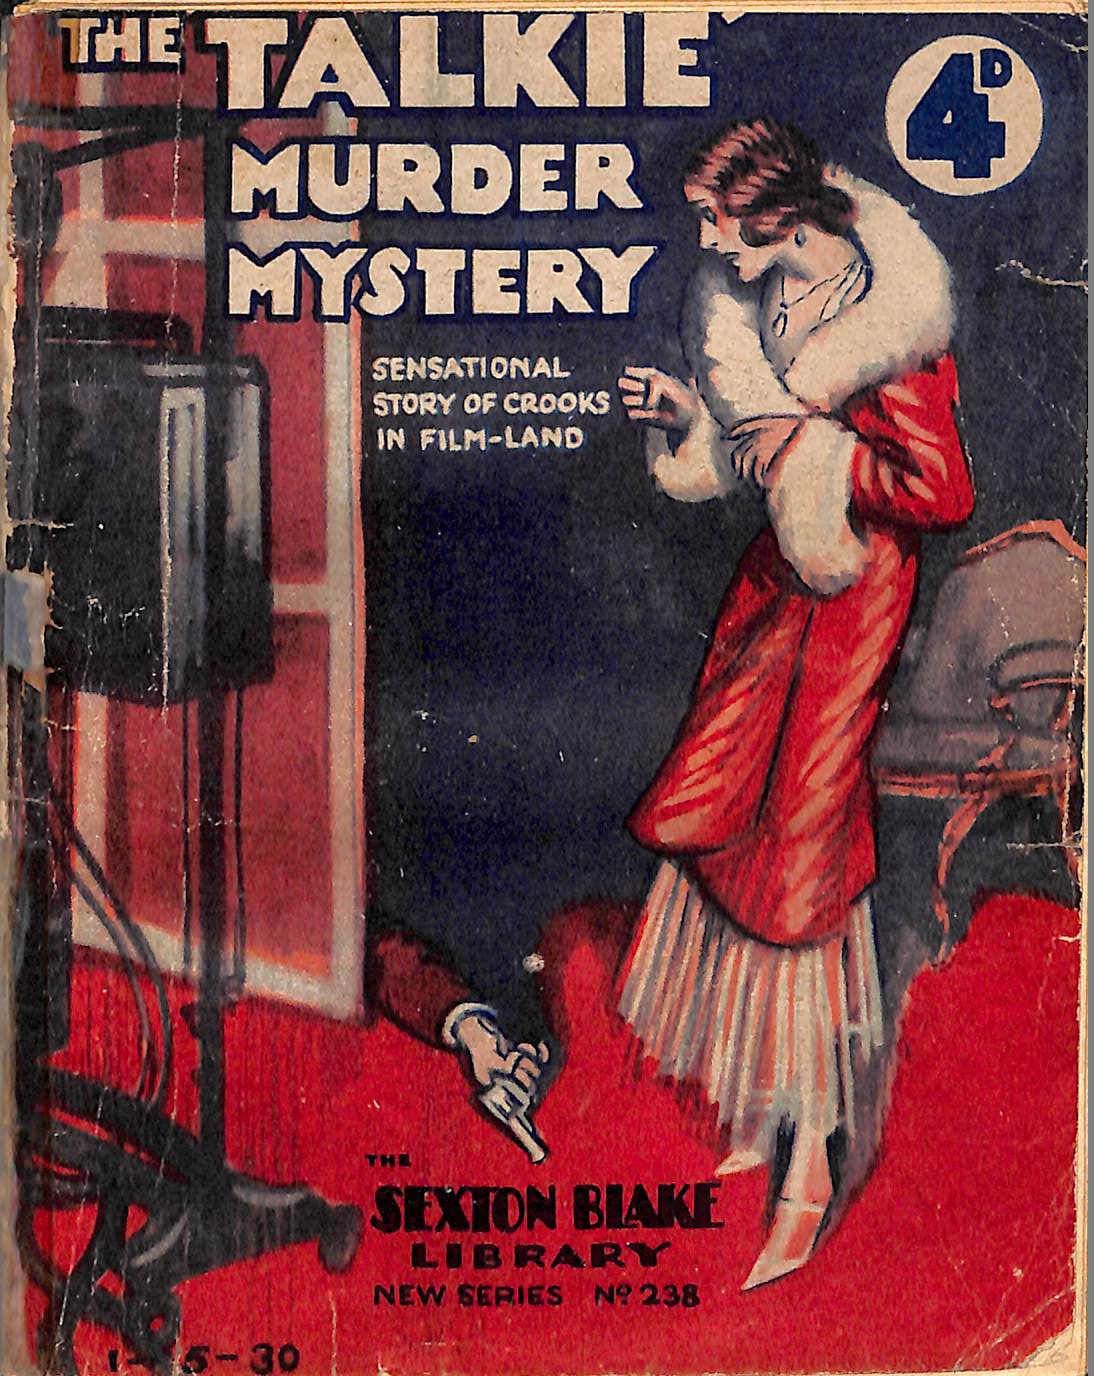 Comic Book Cover For Sexton Blake Library S2 238 - The 'Talkie' Murder Mystery